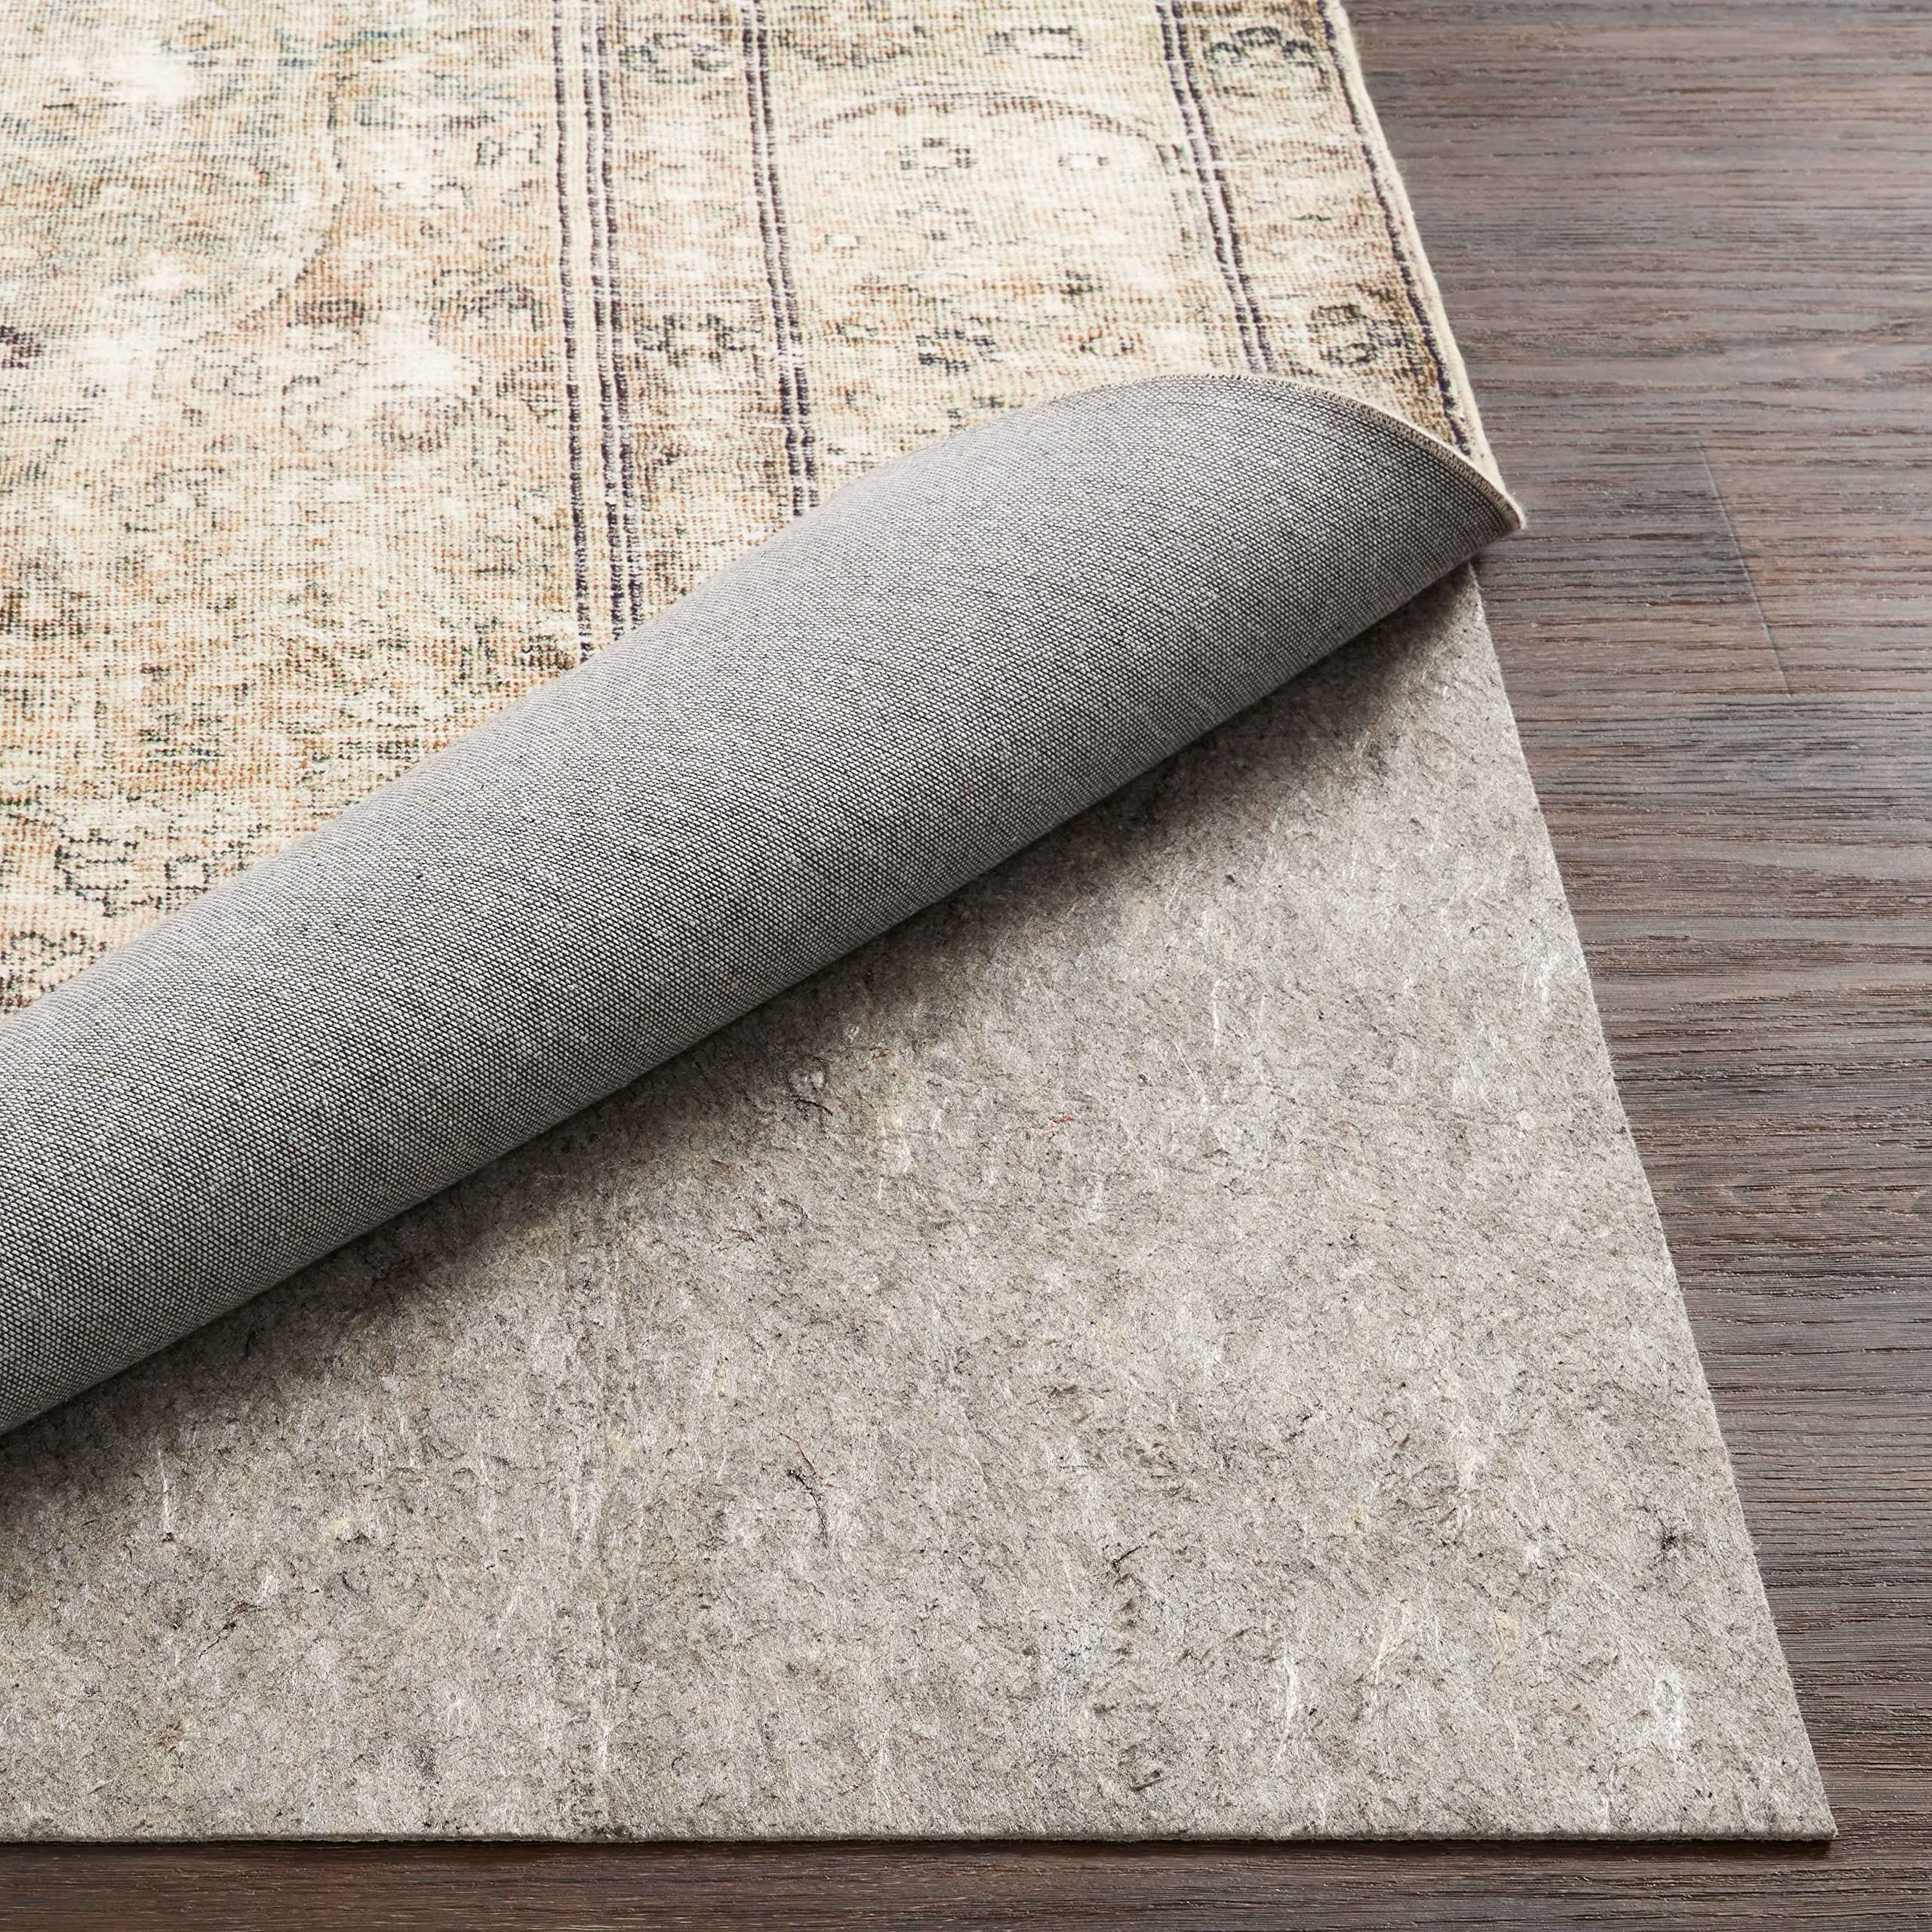 How To Choose Rug Pad